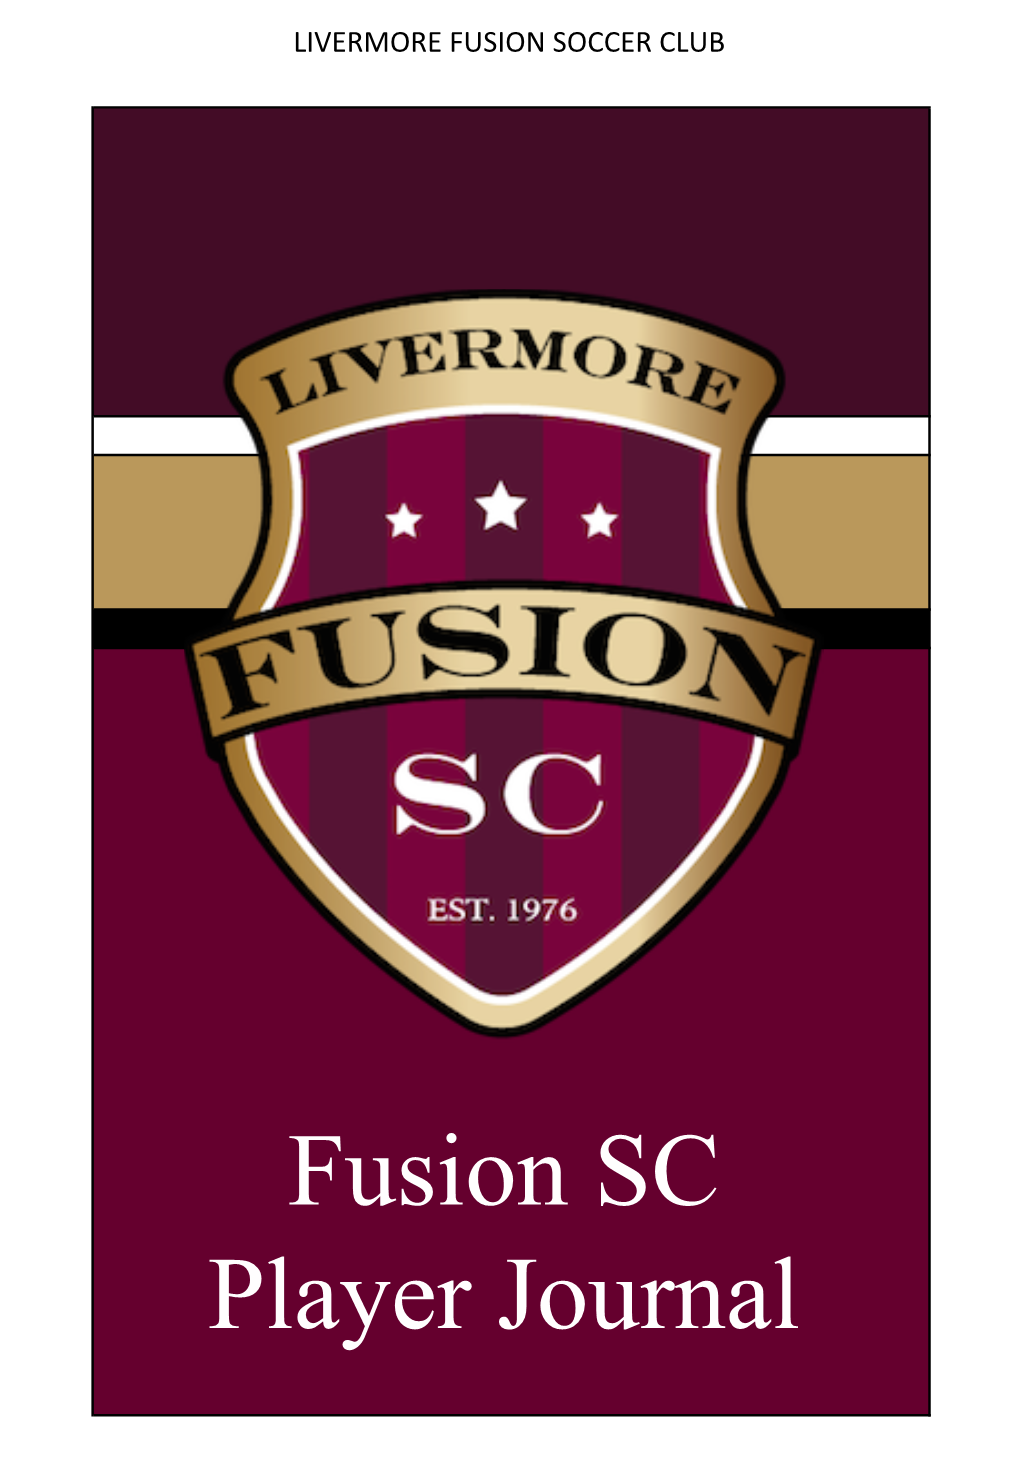 Fusion SC Player Journal LIVERMORE FUSION SOCCER CLUB